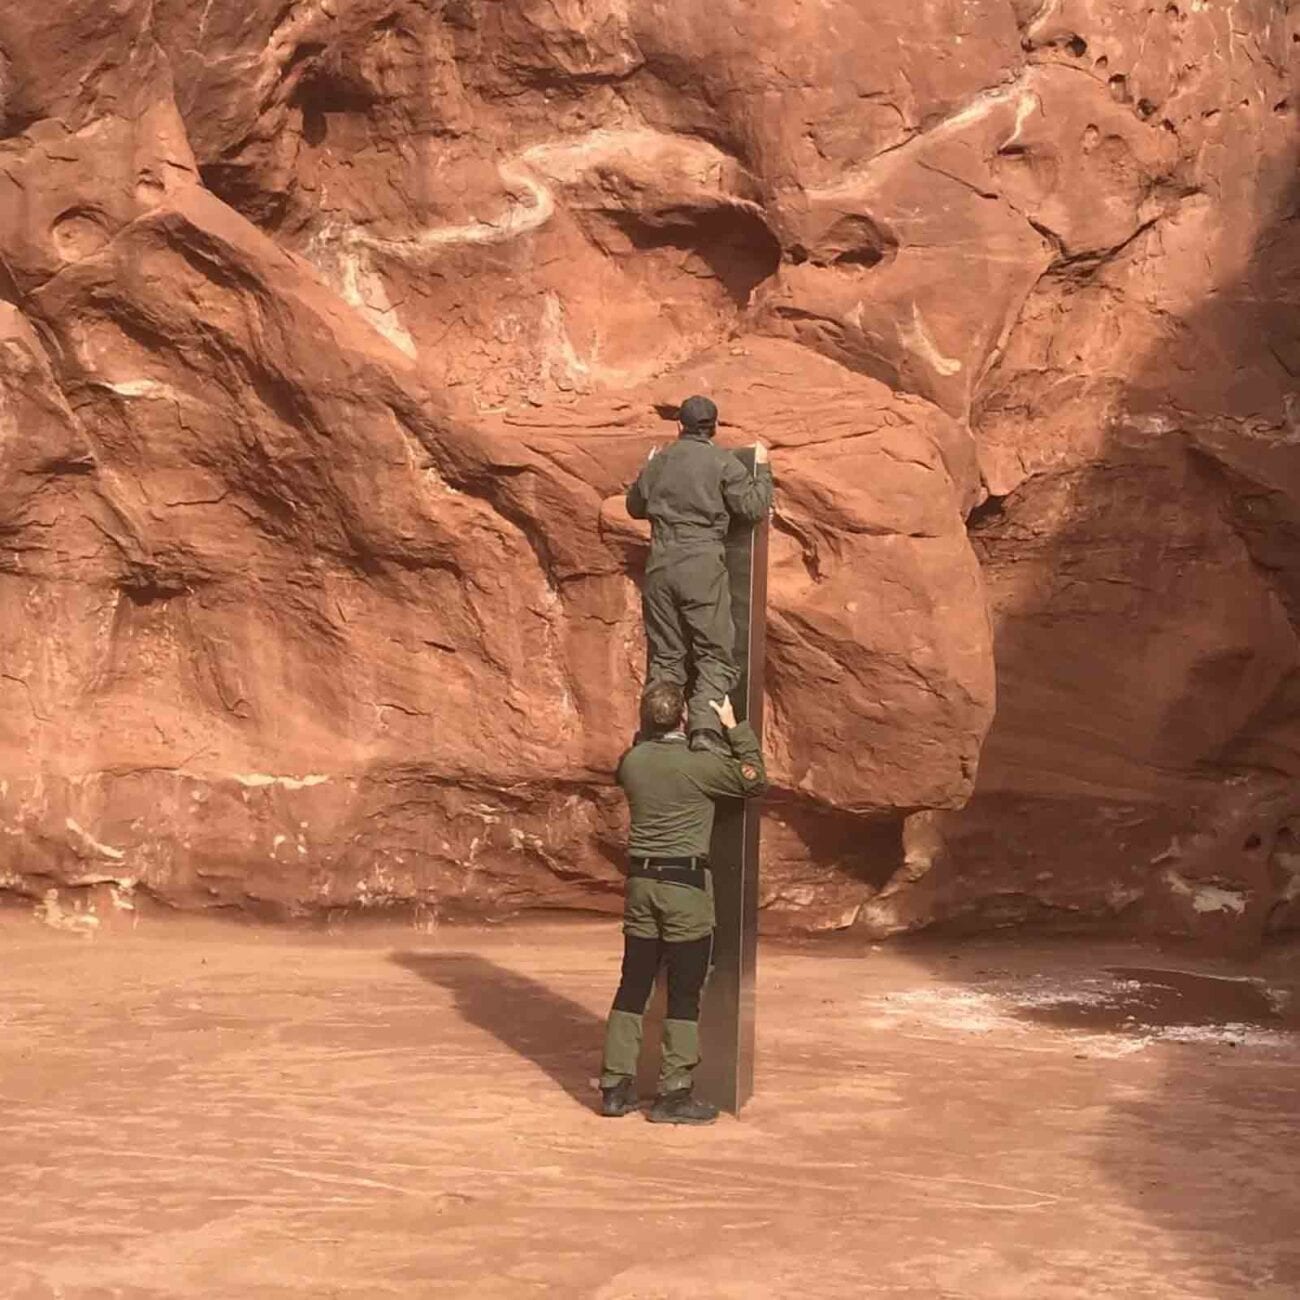 Safety officers spooted a strange metal monolith in Utah. Could this weird object be proof UFOs are real?